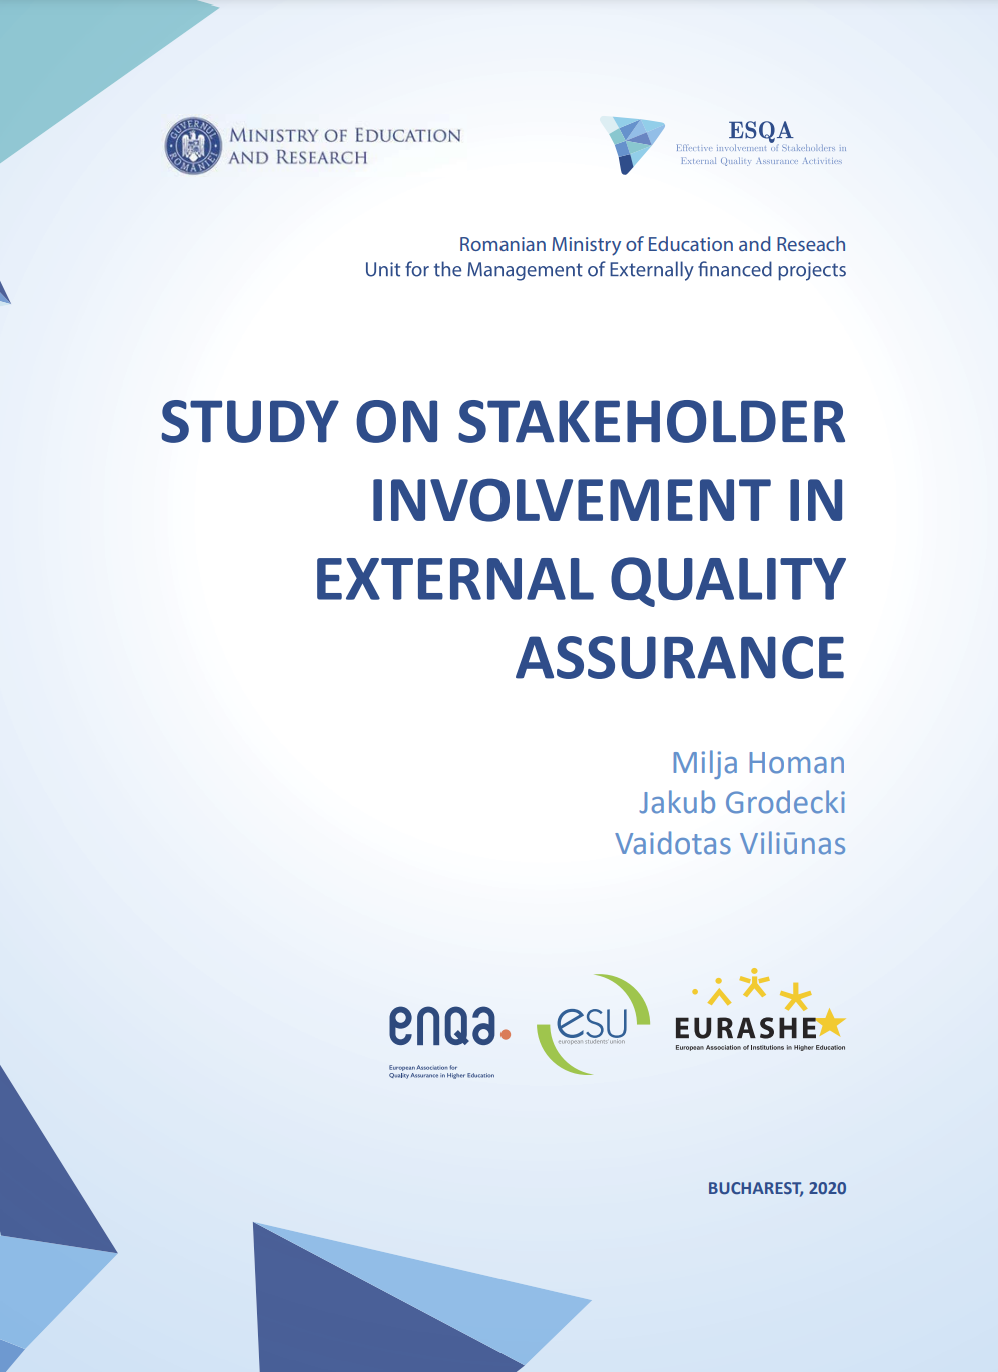 Front Cover of the 2020 Study on stakeholder involvement in external quality assurance